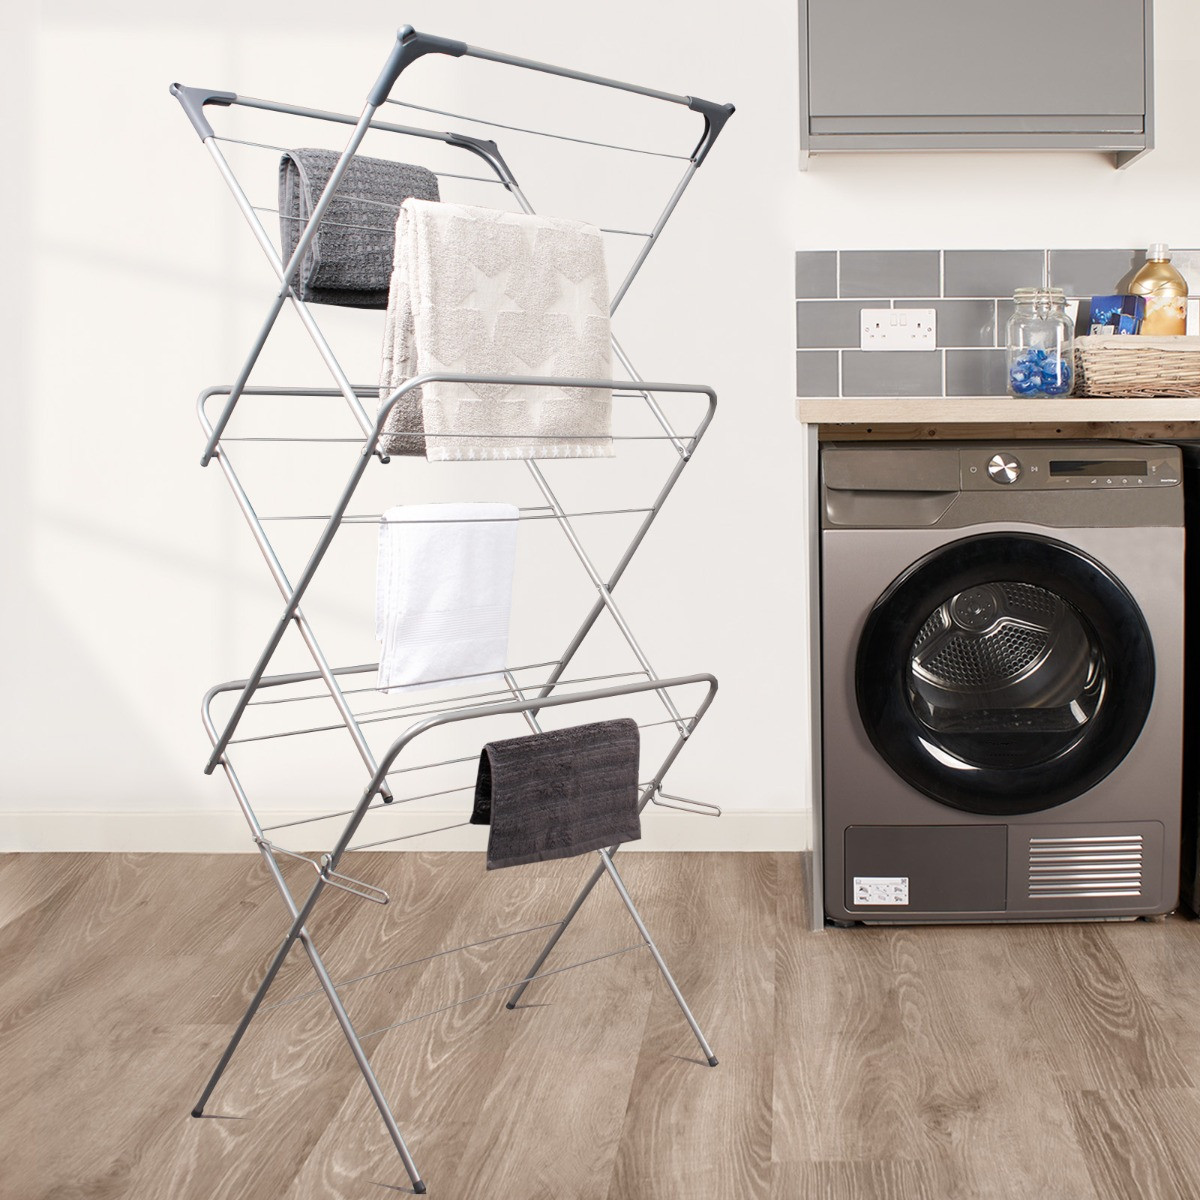 OHS 3 Tier Foldable Clothes Airer, Grey - 15M>